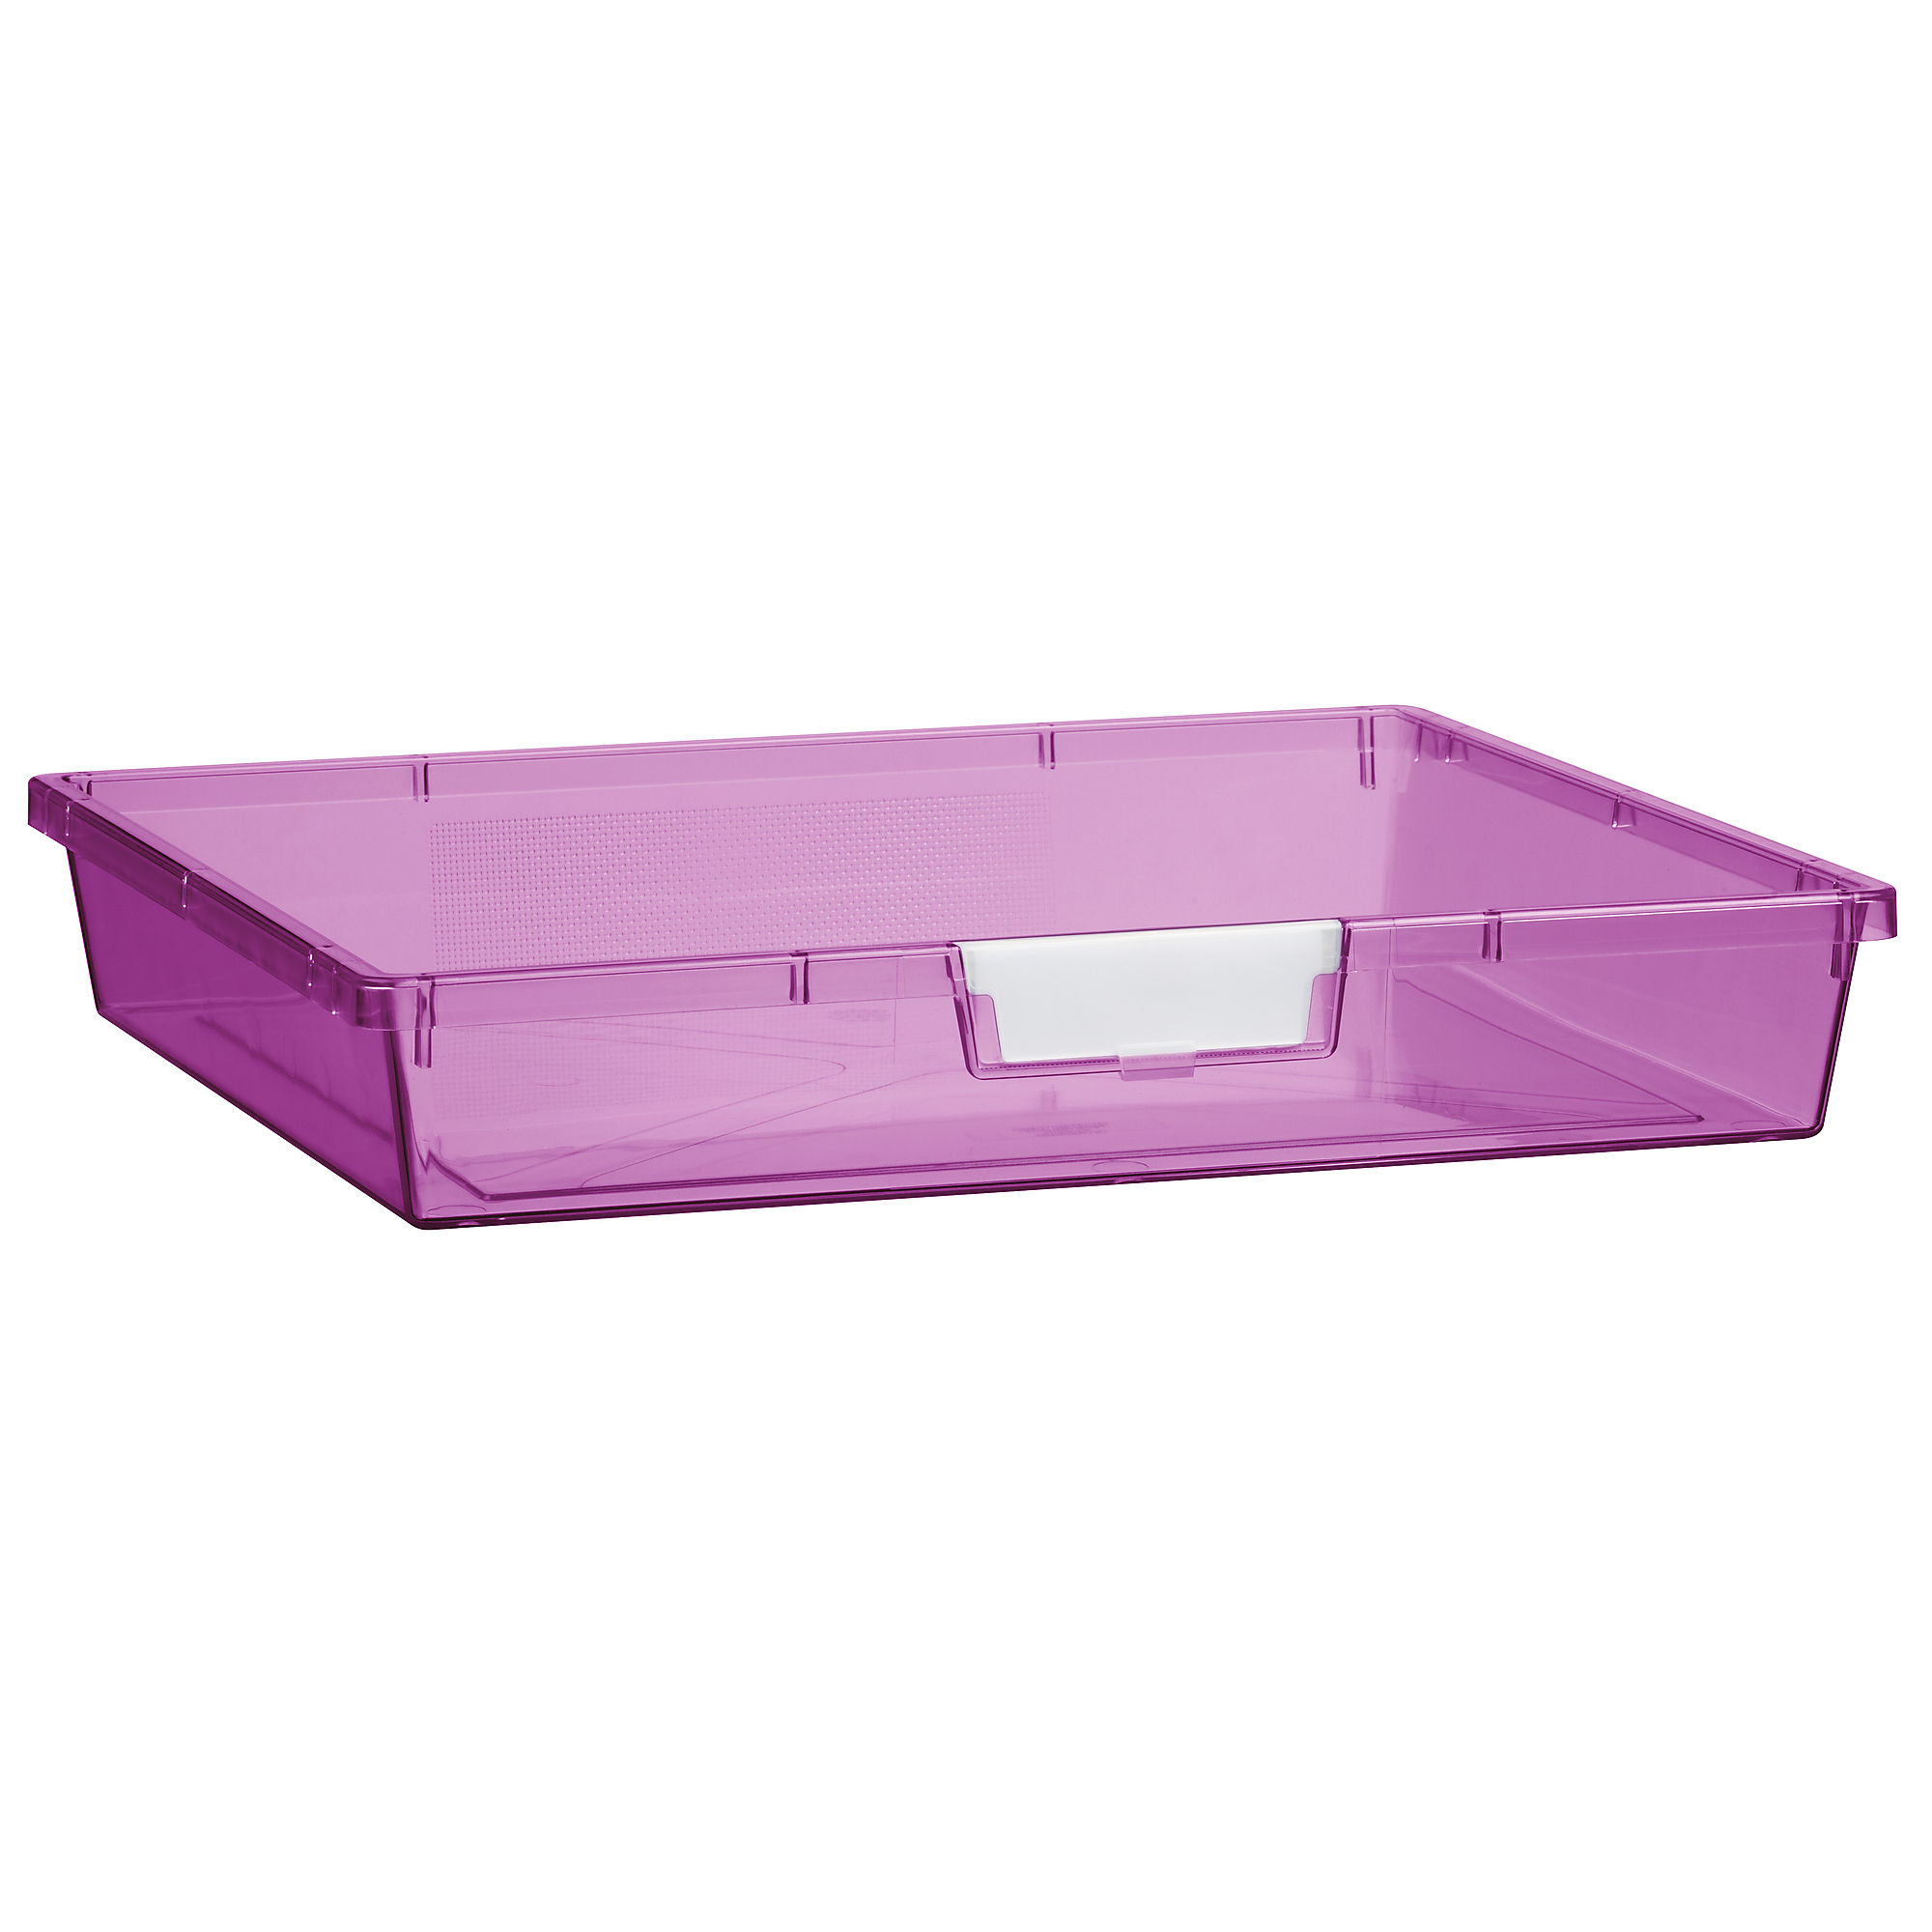 Certwood StorWerks, Wide Line Tray 3Inch in Tinted Purple - 1 Pack, Included (qty.) 1, Material Plastic, Height 12 in, Model CE1956TP1